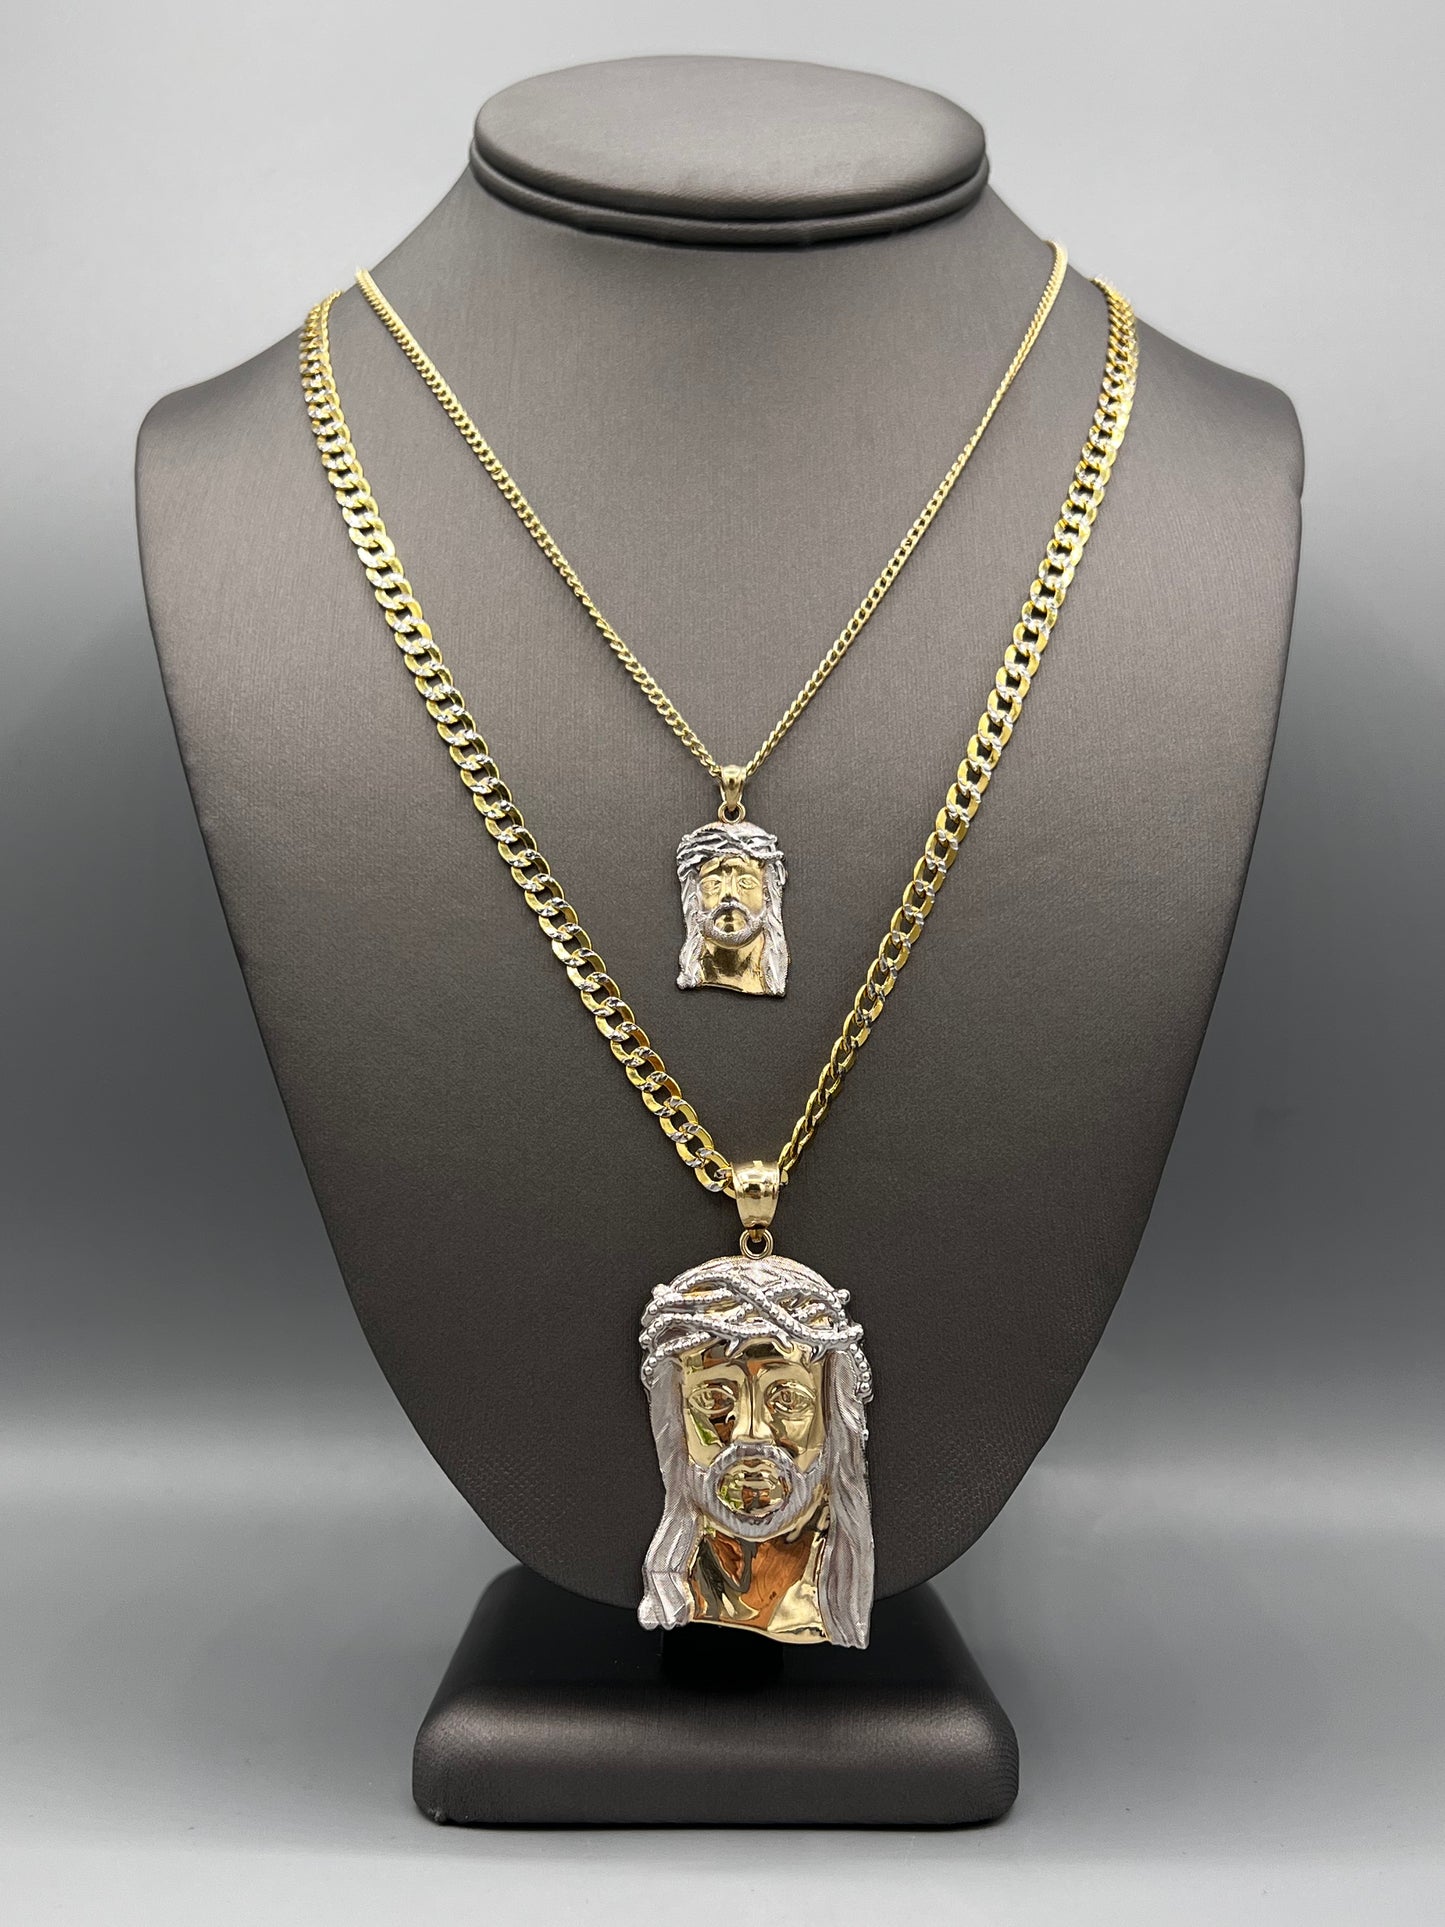 New 🔥 14K Jesus Face With Free Small Chain by GDO